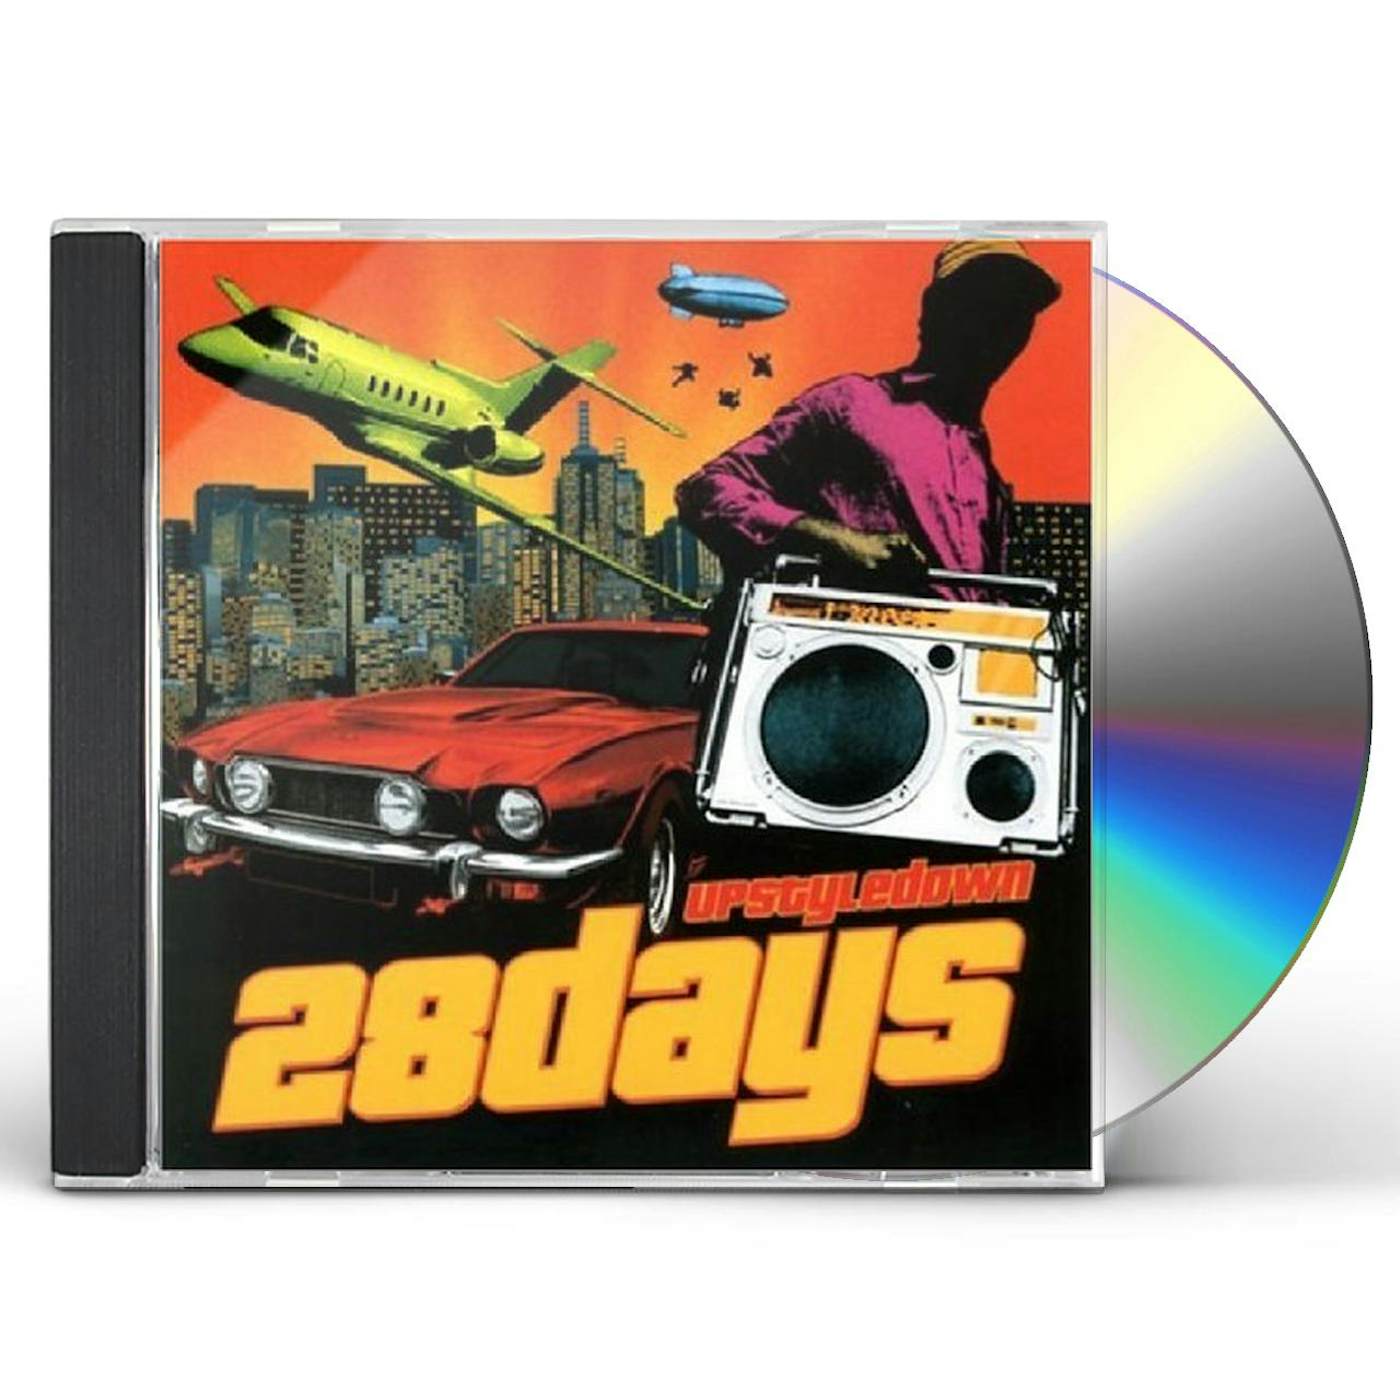 28 Days UPSTYLE DOWN CD